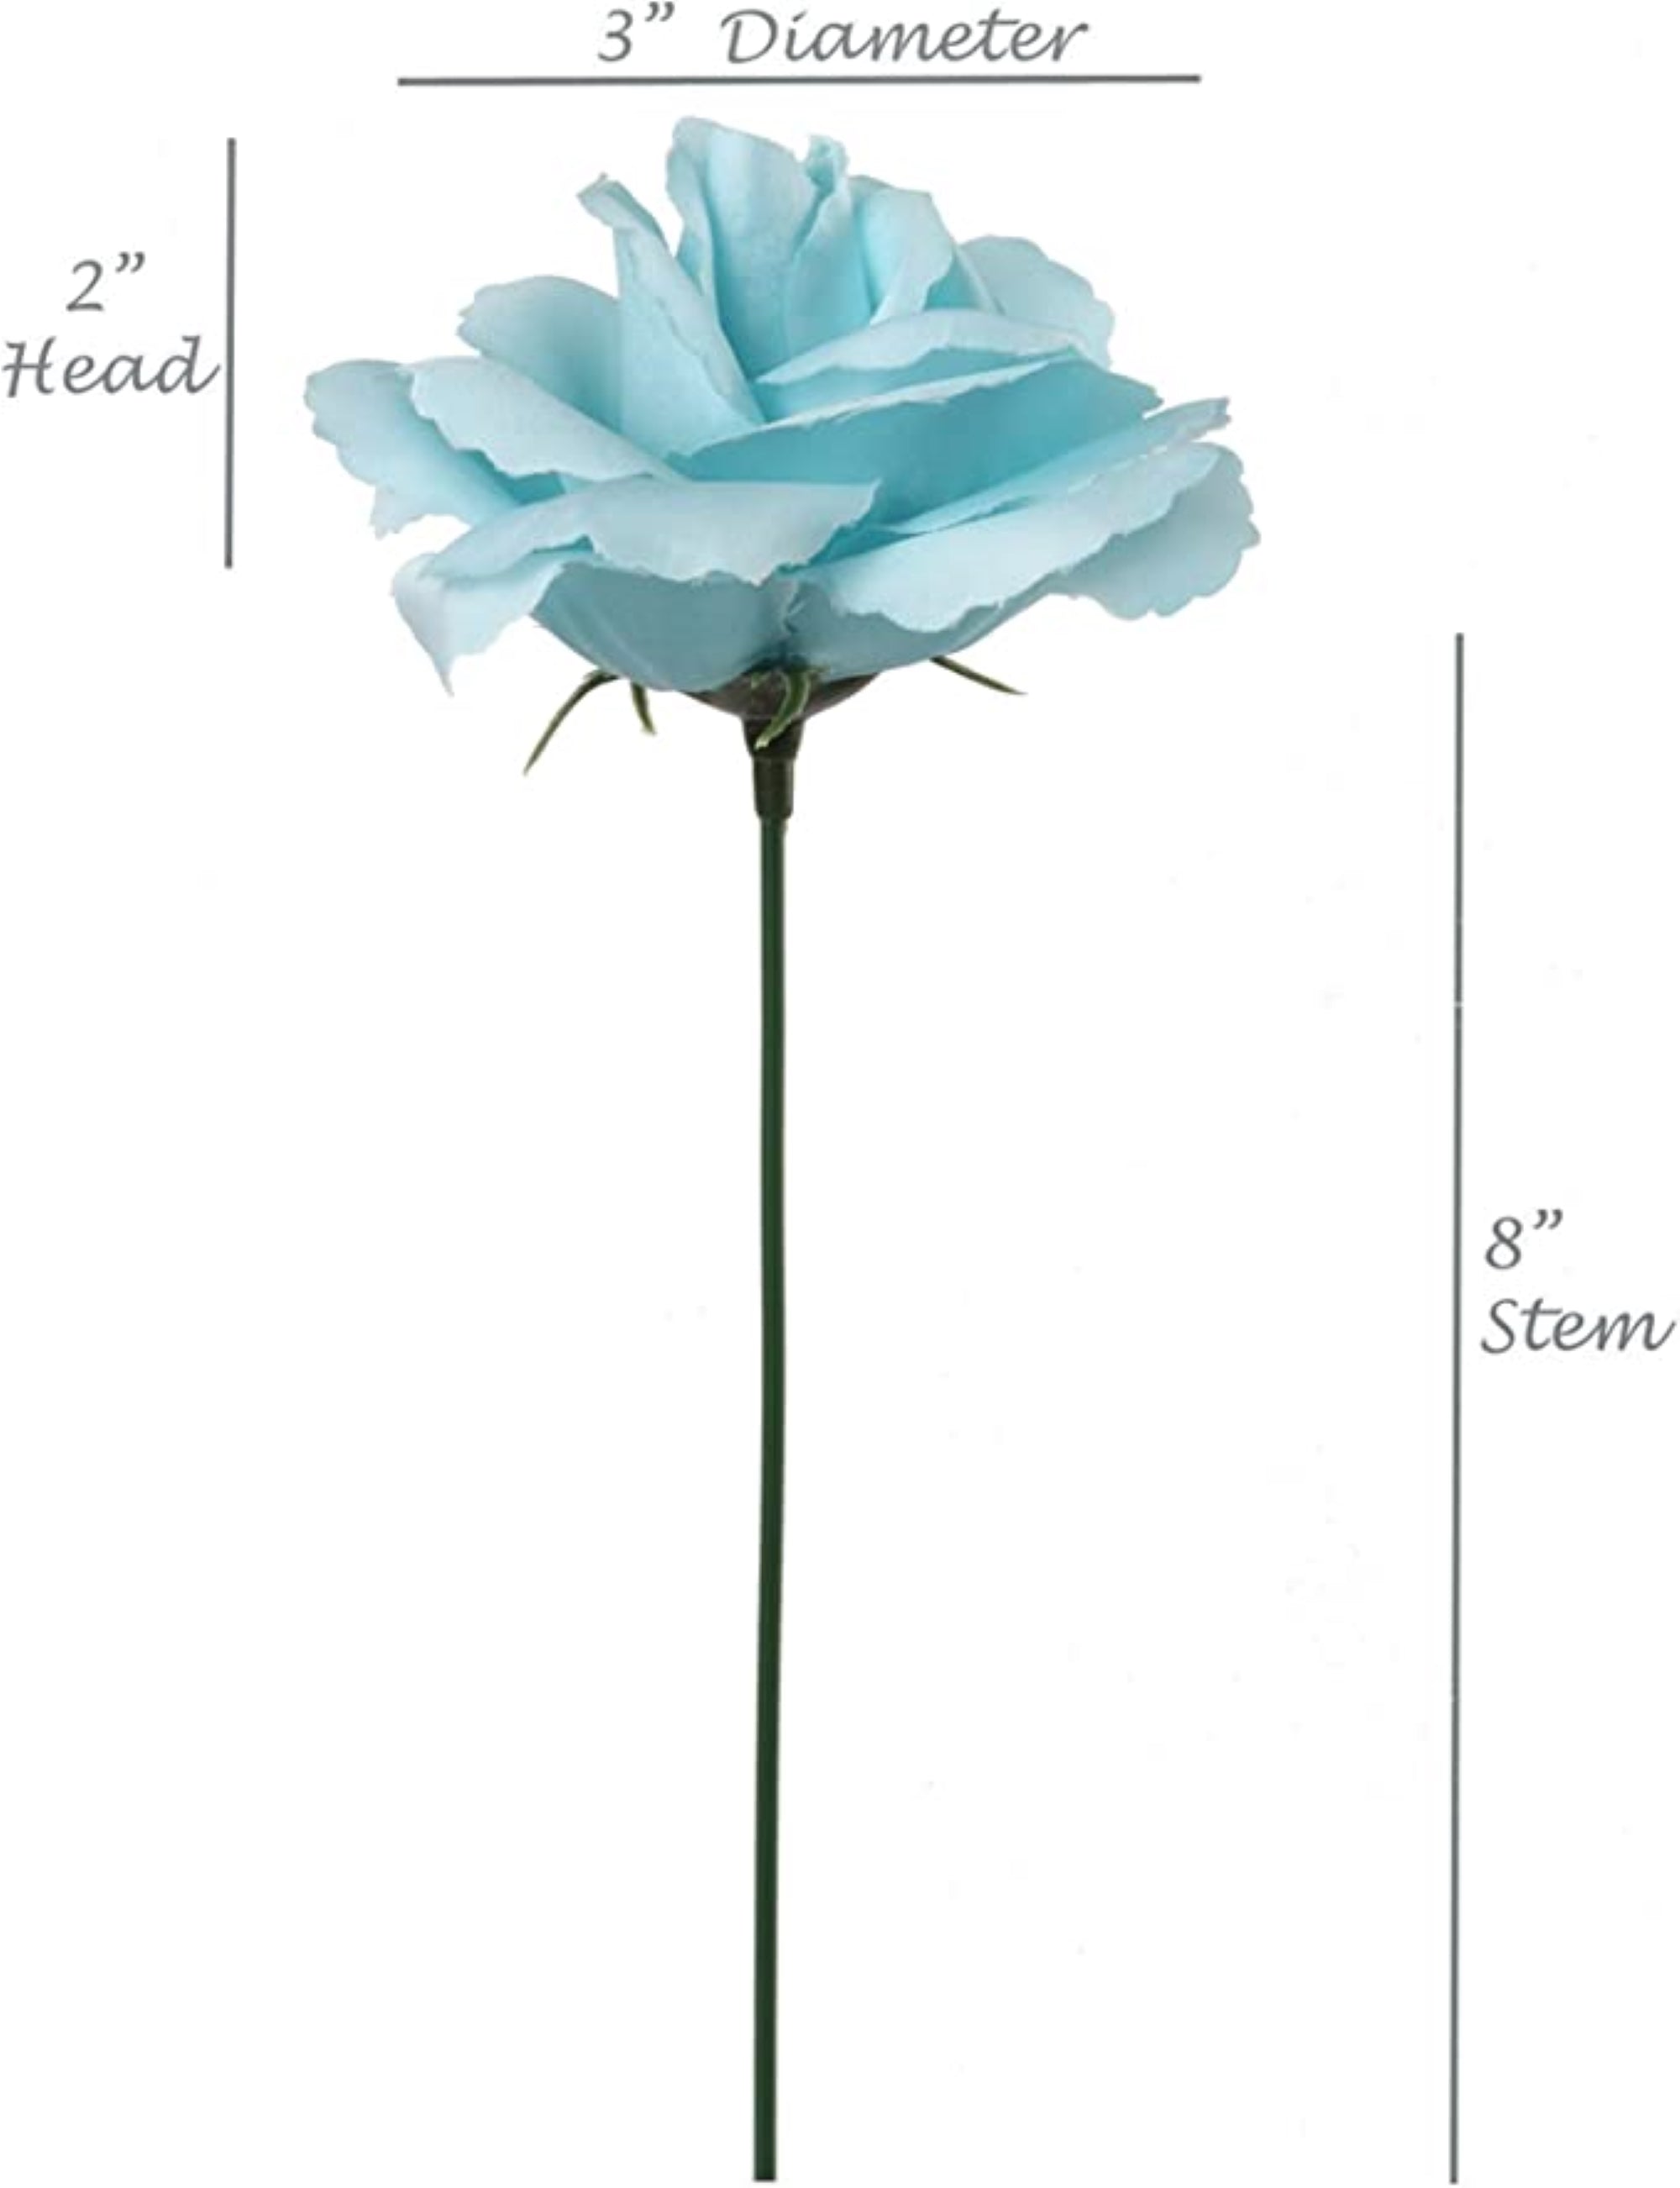 Elegant 100pc Set of 8" Pale Blue Silk Rose Picks - High-Quality Artificial Flowers for Weddings, Home Décor, and DIY Crafts - Best Value Faux Floral Bouquet Components